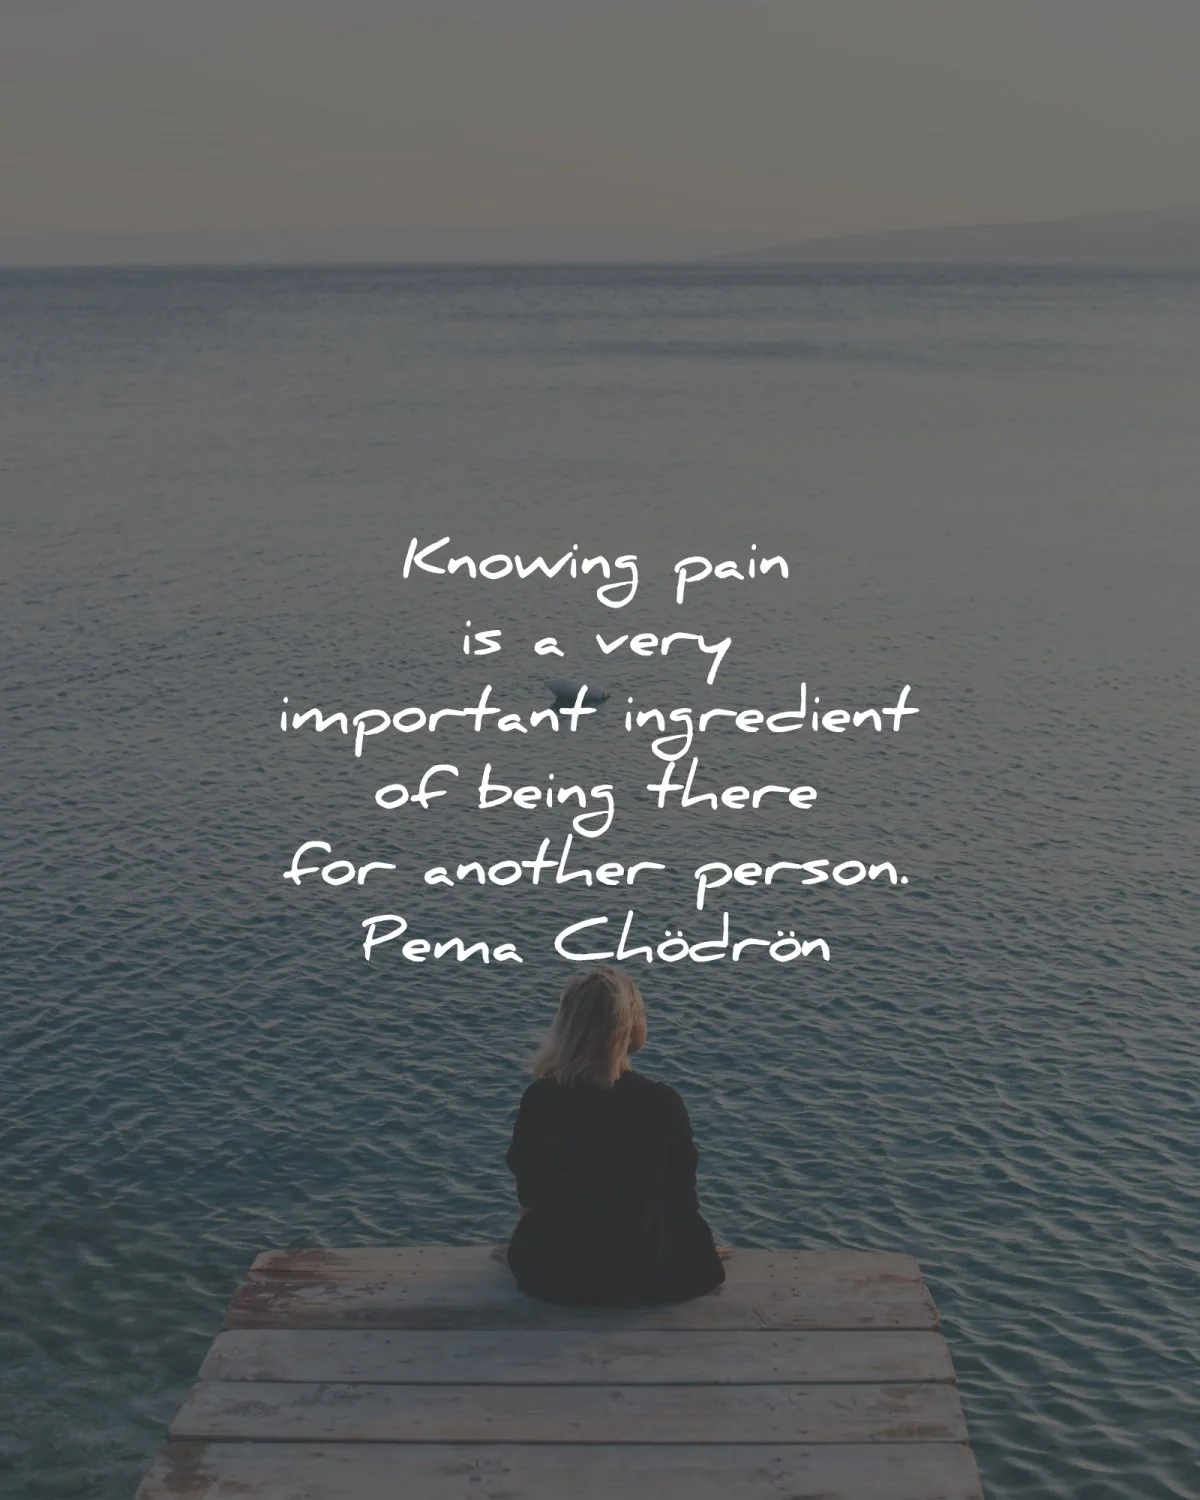 pema chodron quotes knowing pain ingredient another person wisdom